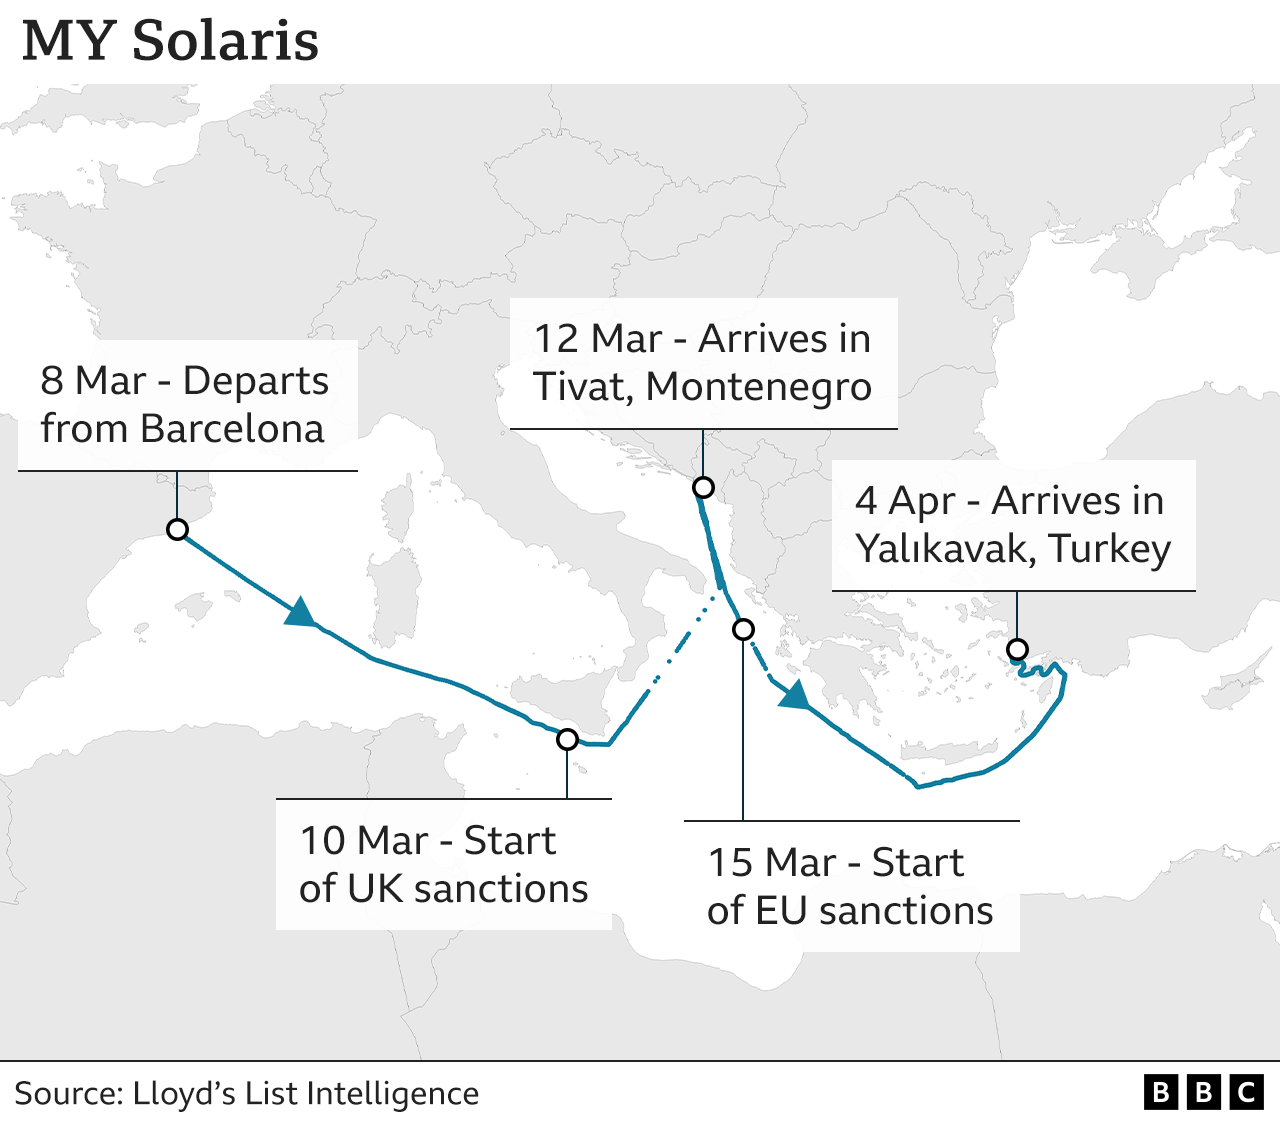 Map showing the route of the My Solaris